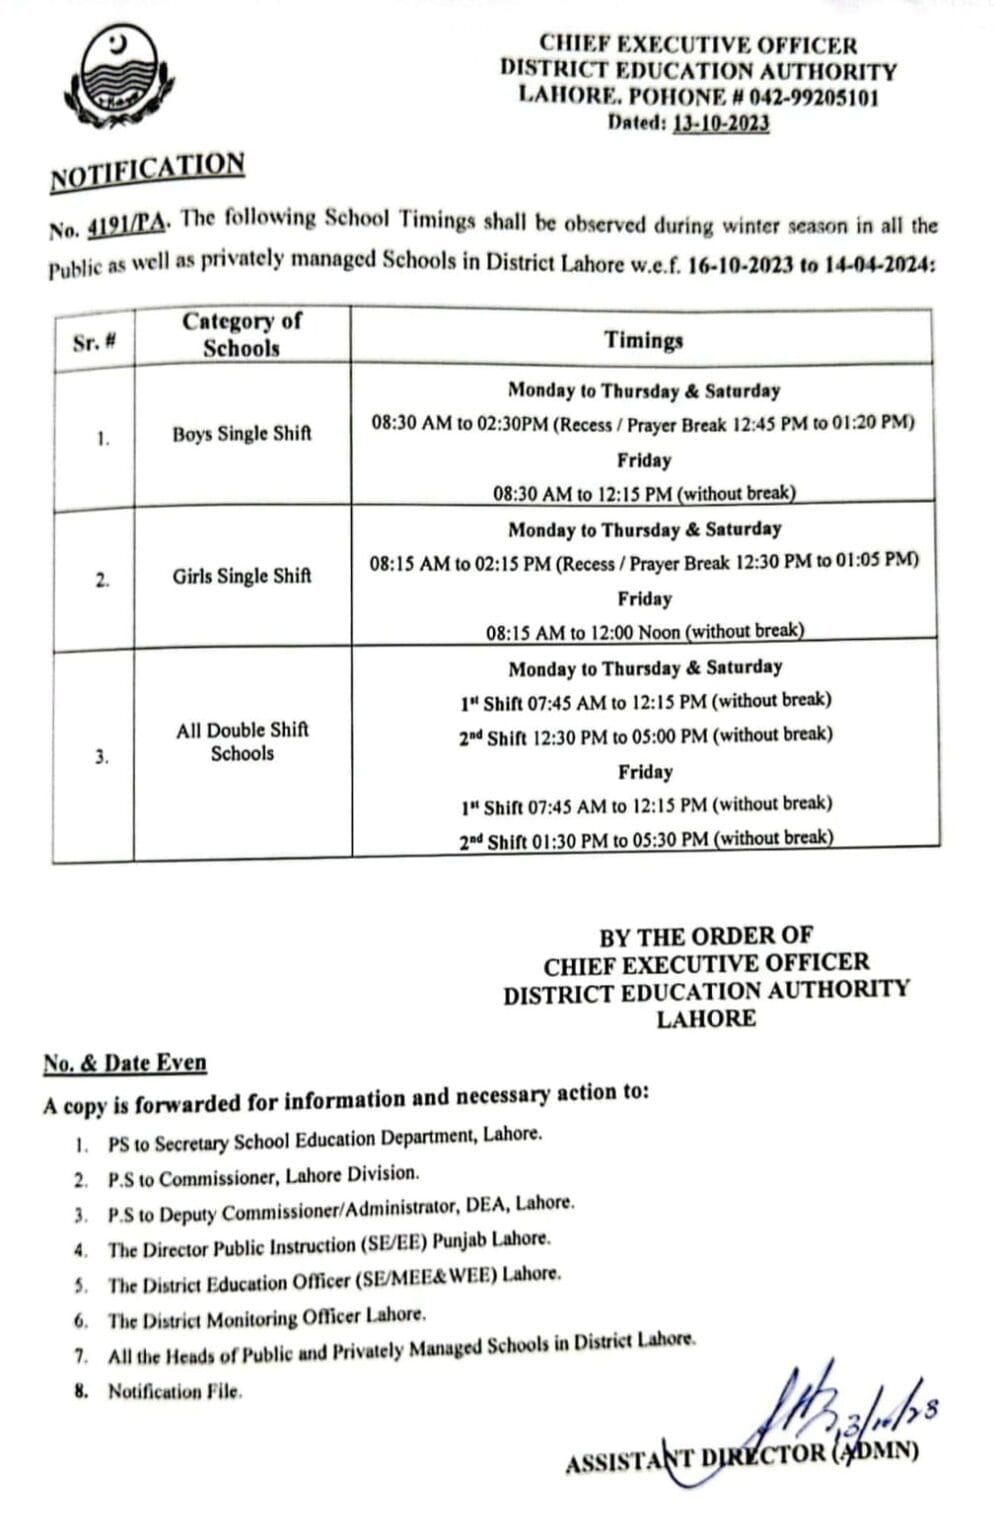 Notification of Revised School Timing In Lahore has Been Issued